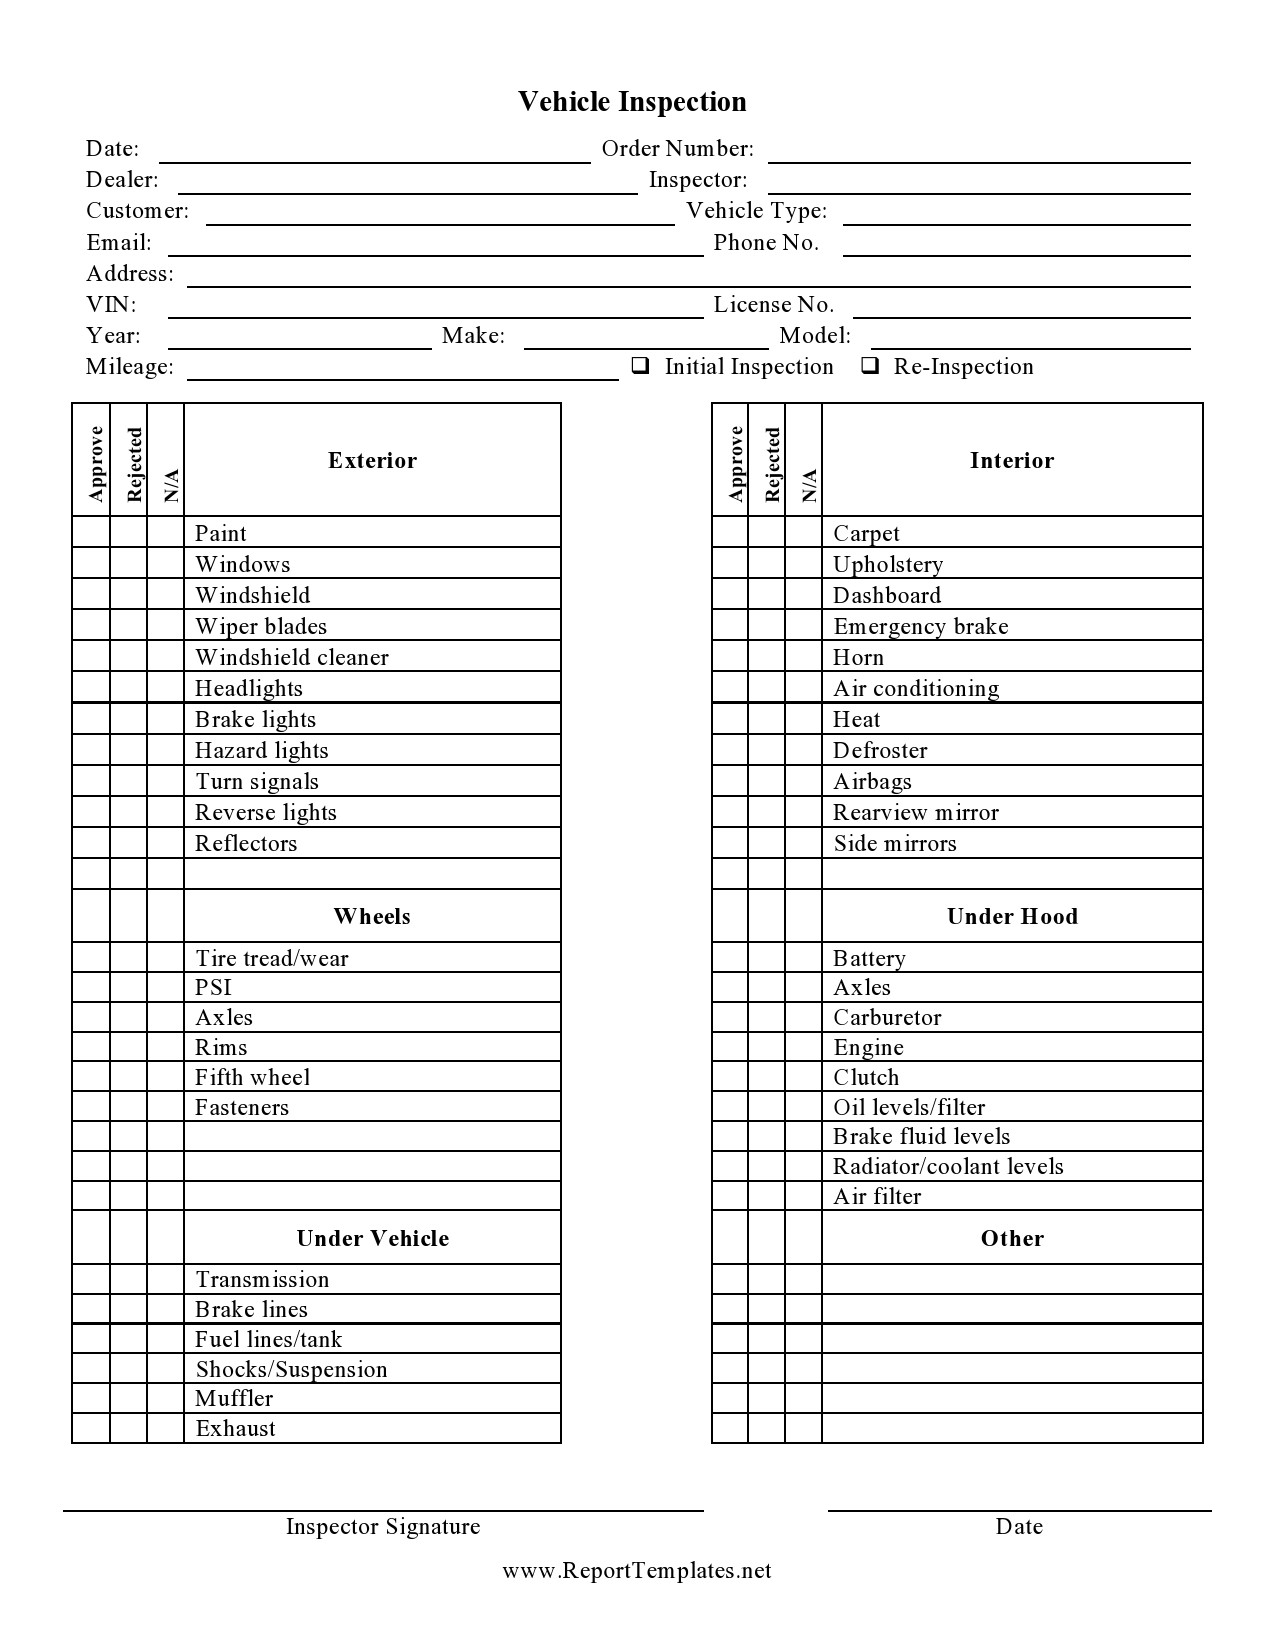 Free vehicle inspection form 25